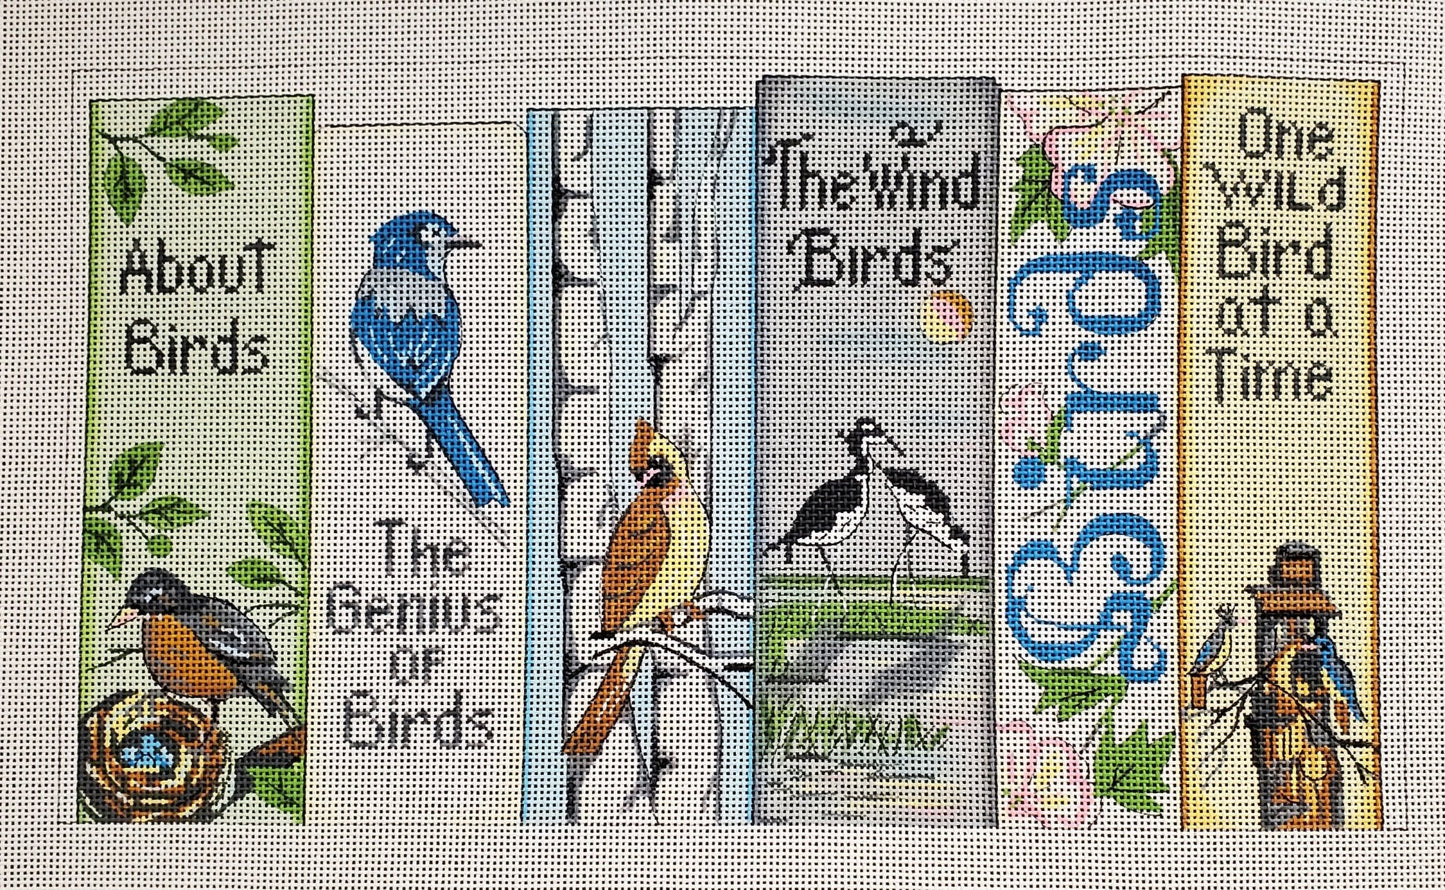 Bird Books Alice Peterson Designs - The Flying Needles